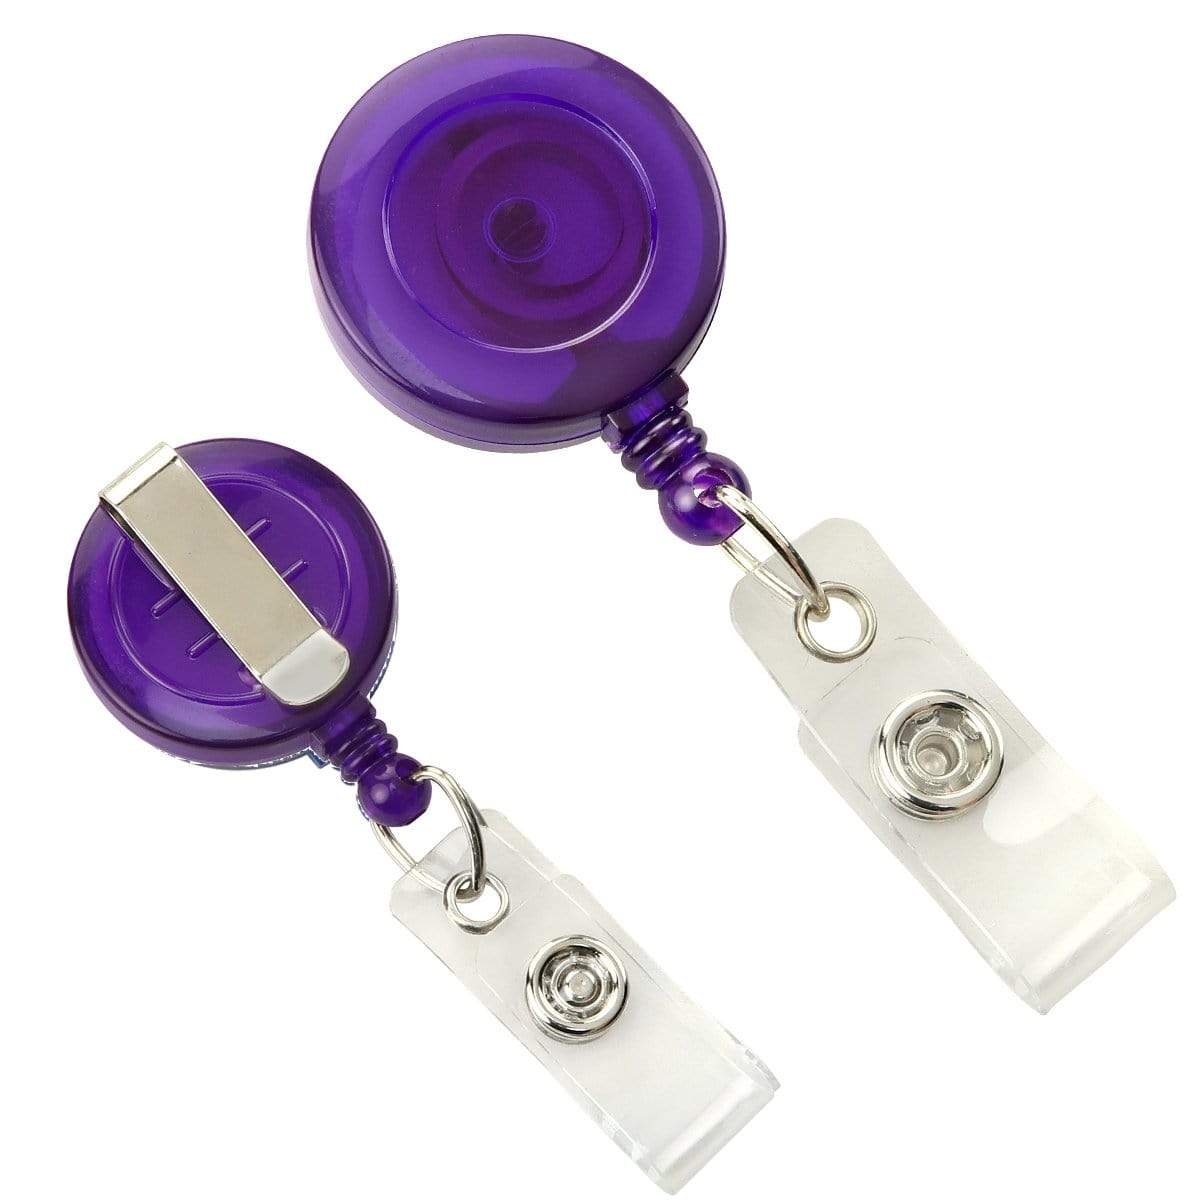 Translucent Clear Retractable Badge Reel with Belt Clip (2120-360X)